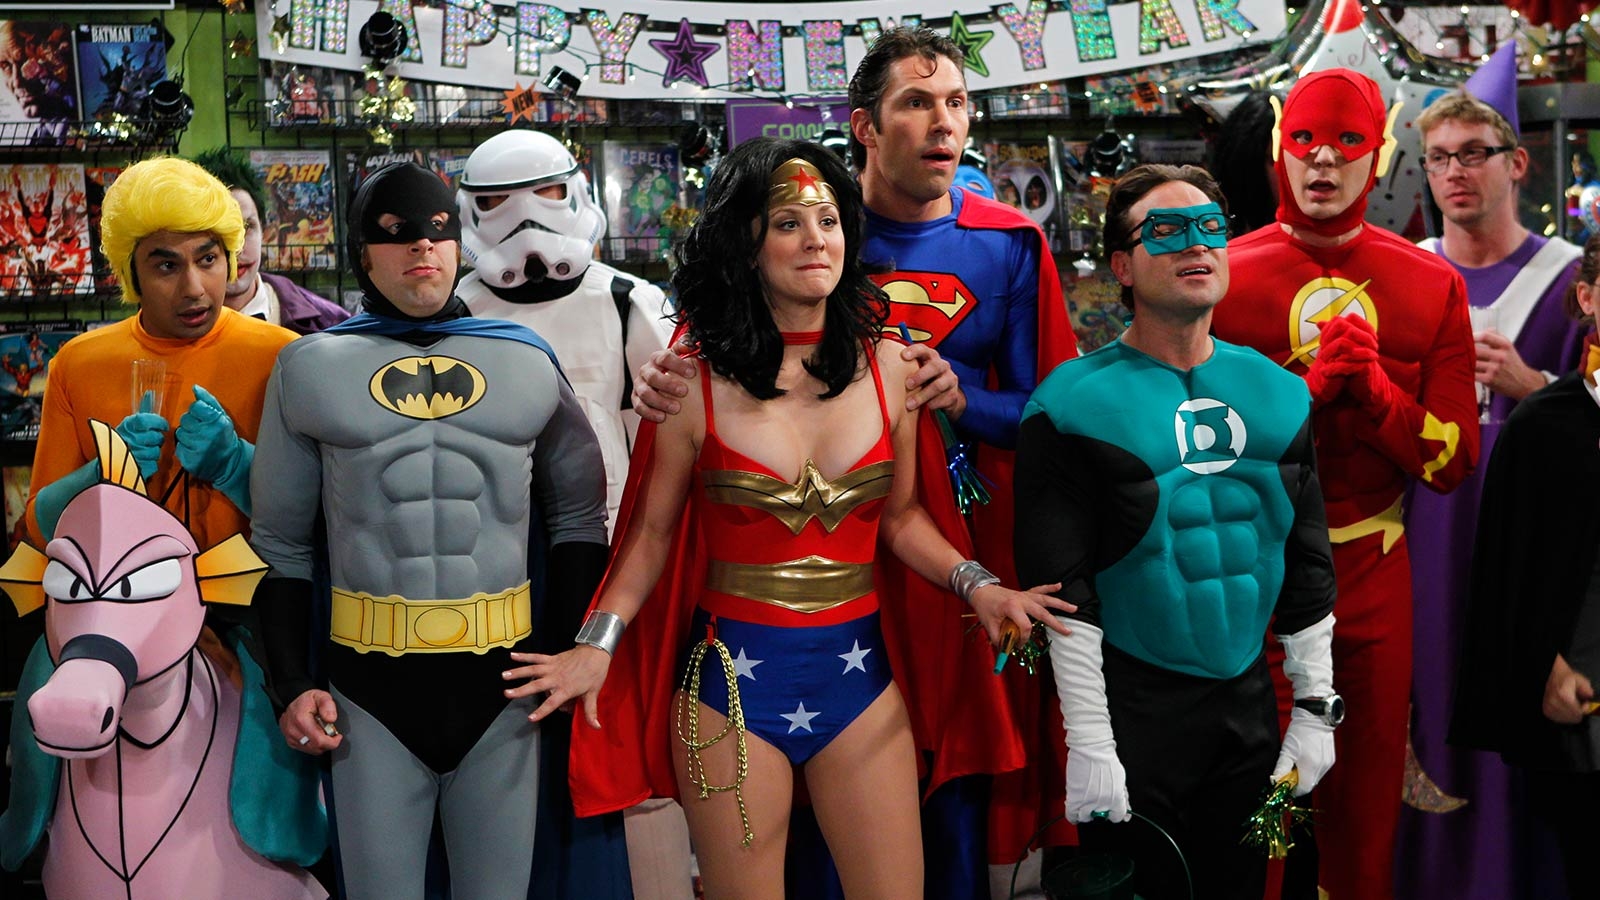 The main characters and Zach dressed as the Justice League in The Big Bang Theory.